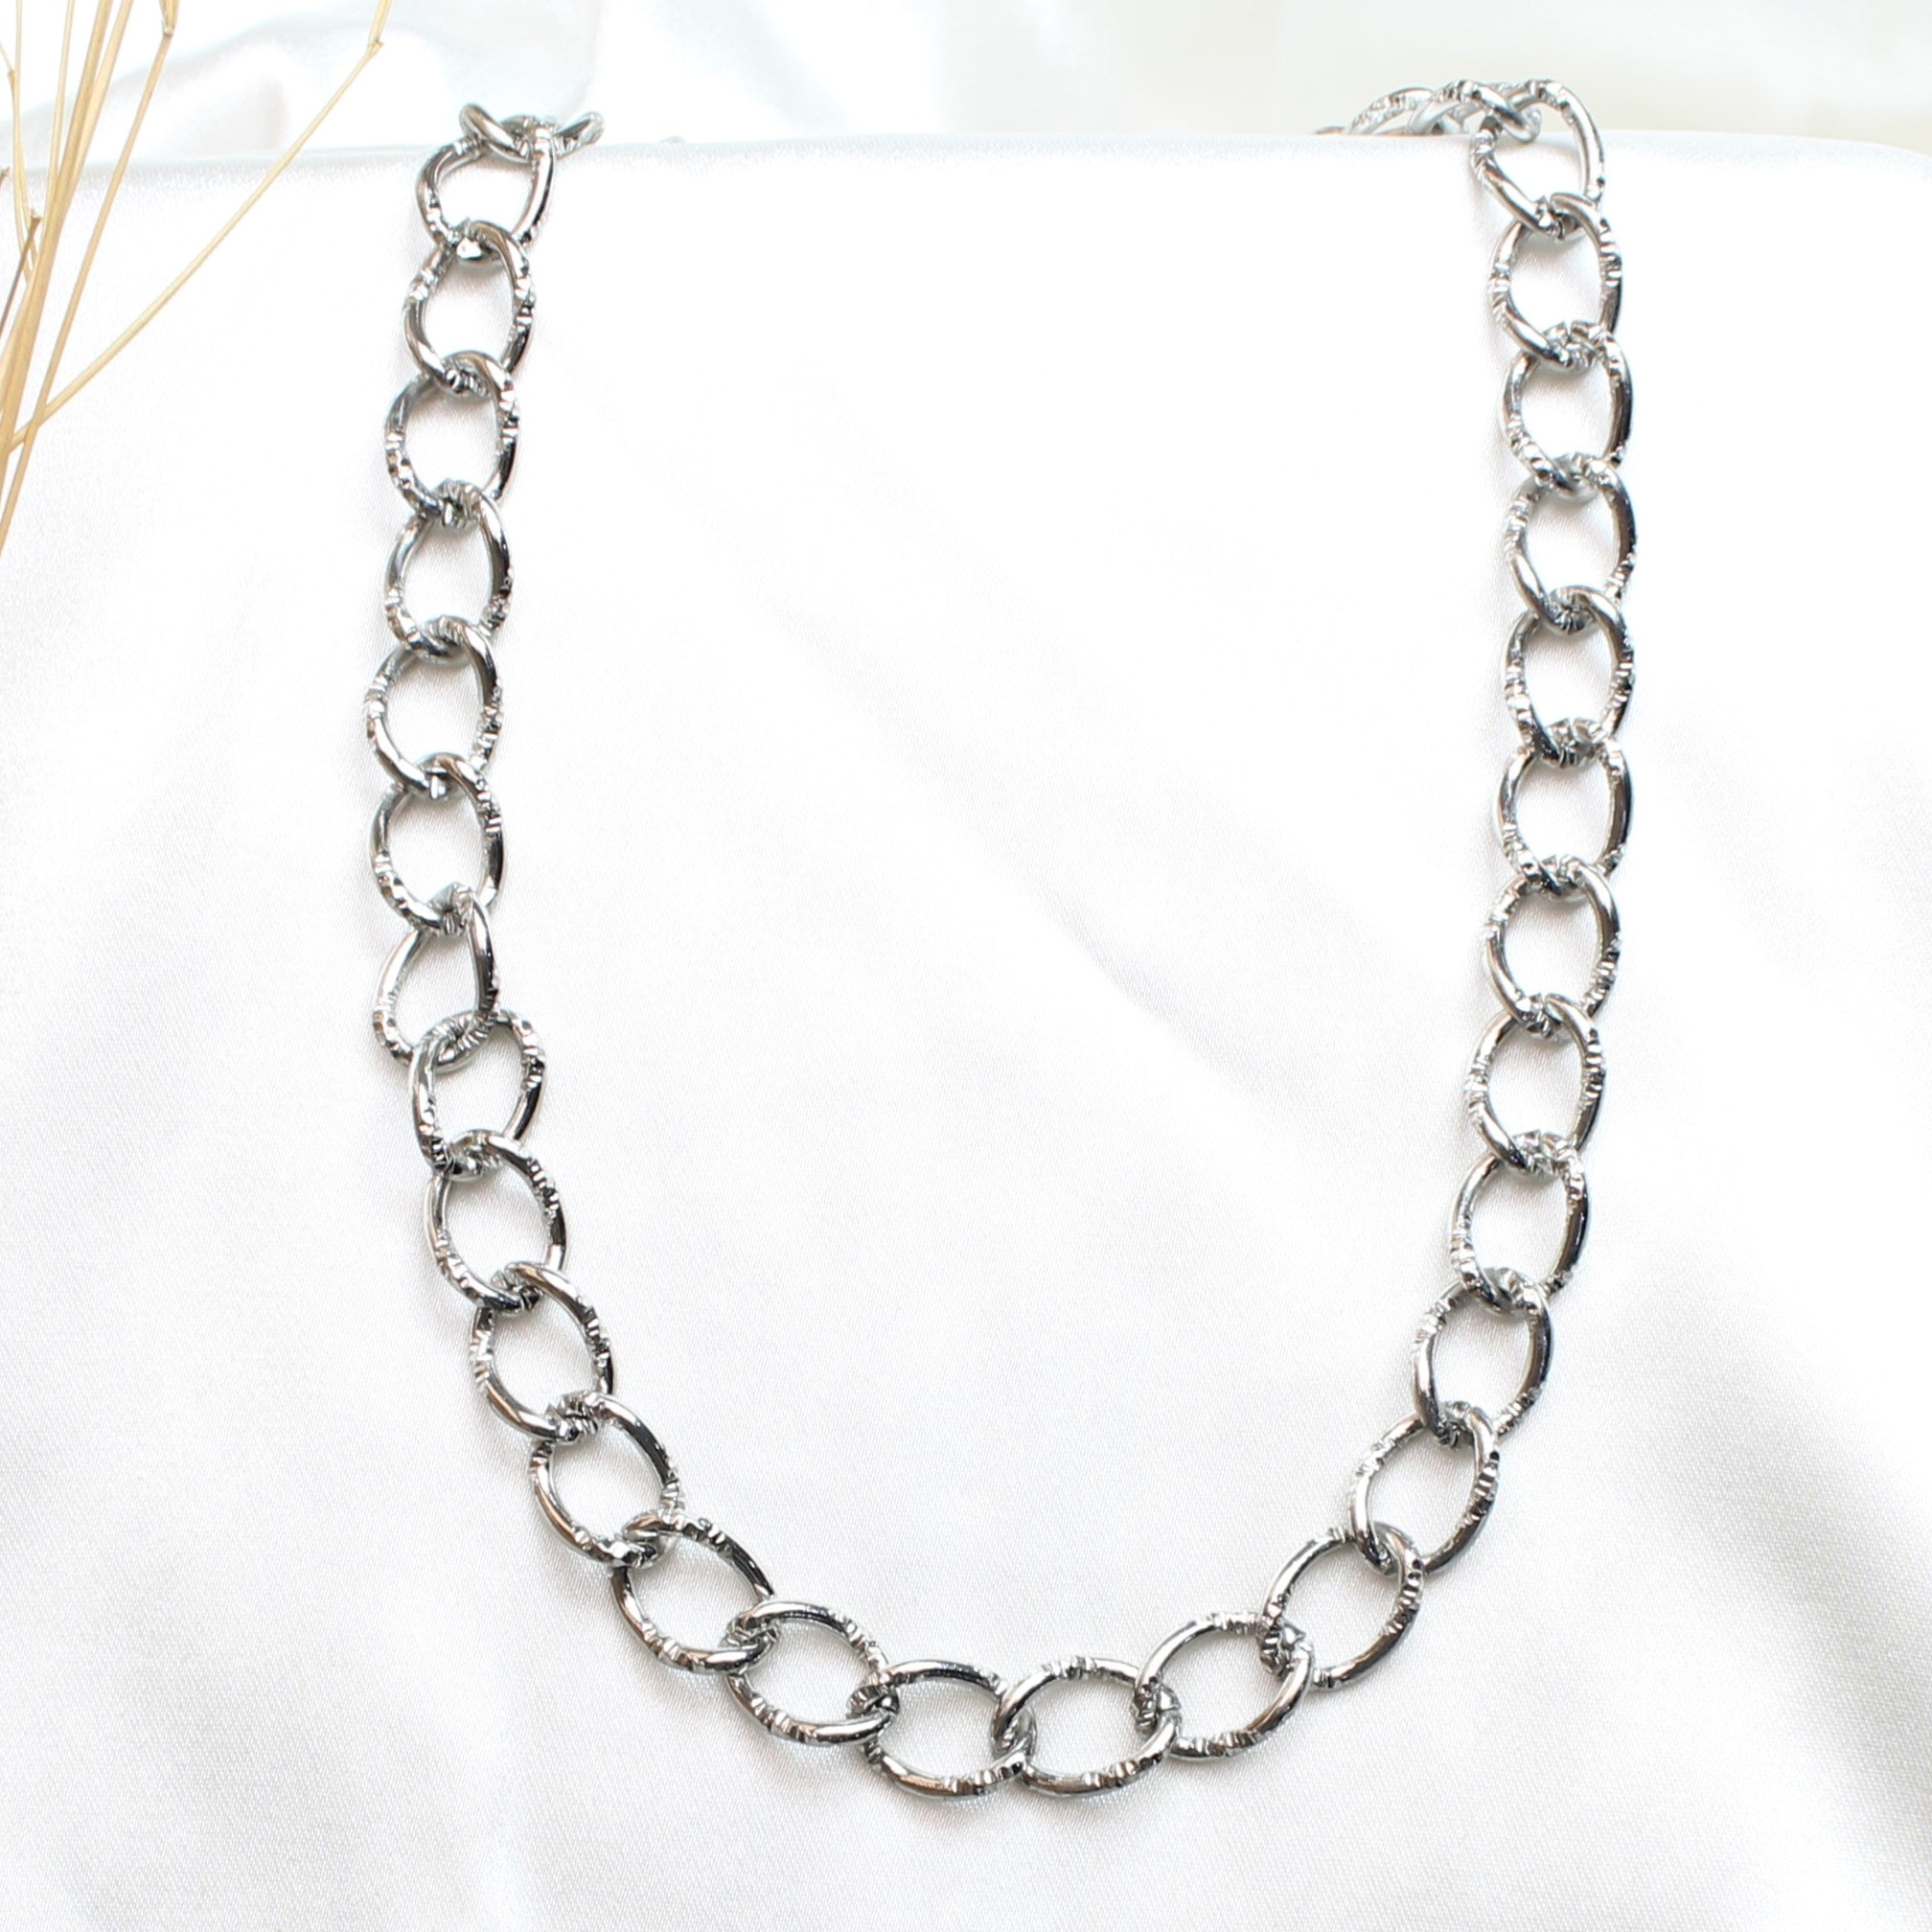 TFC Turino Luxury Silver Plated Chain Necklace